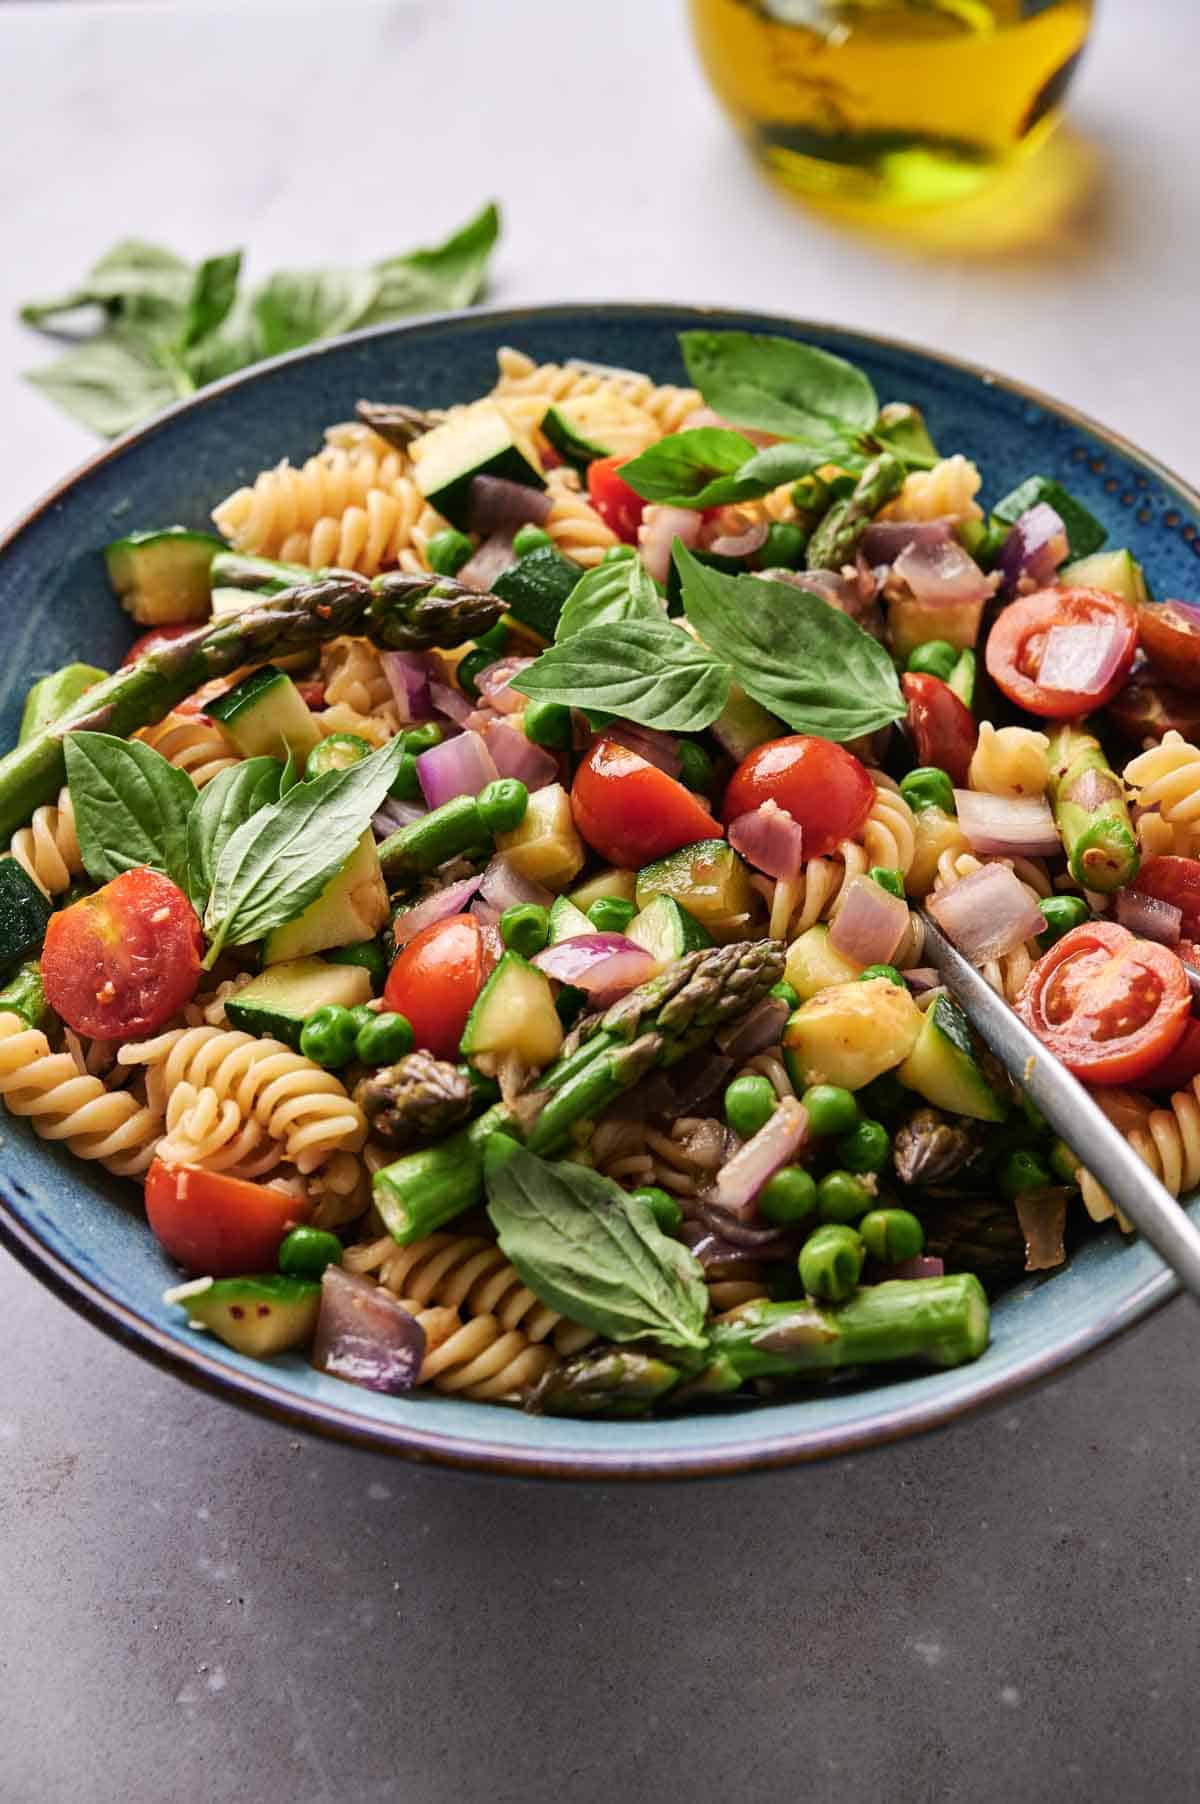 A colorful Pasta Primavera salad with fusilli, cherry tomatoes, asparagus, peas, and fresh basil, served on a blue plate with a fork.